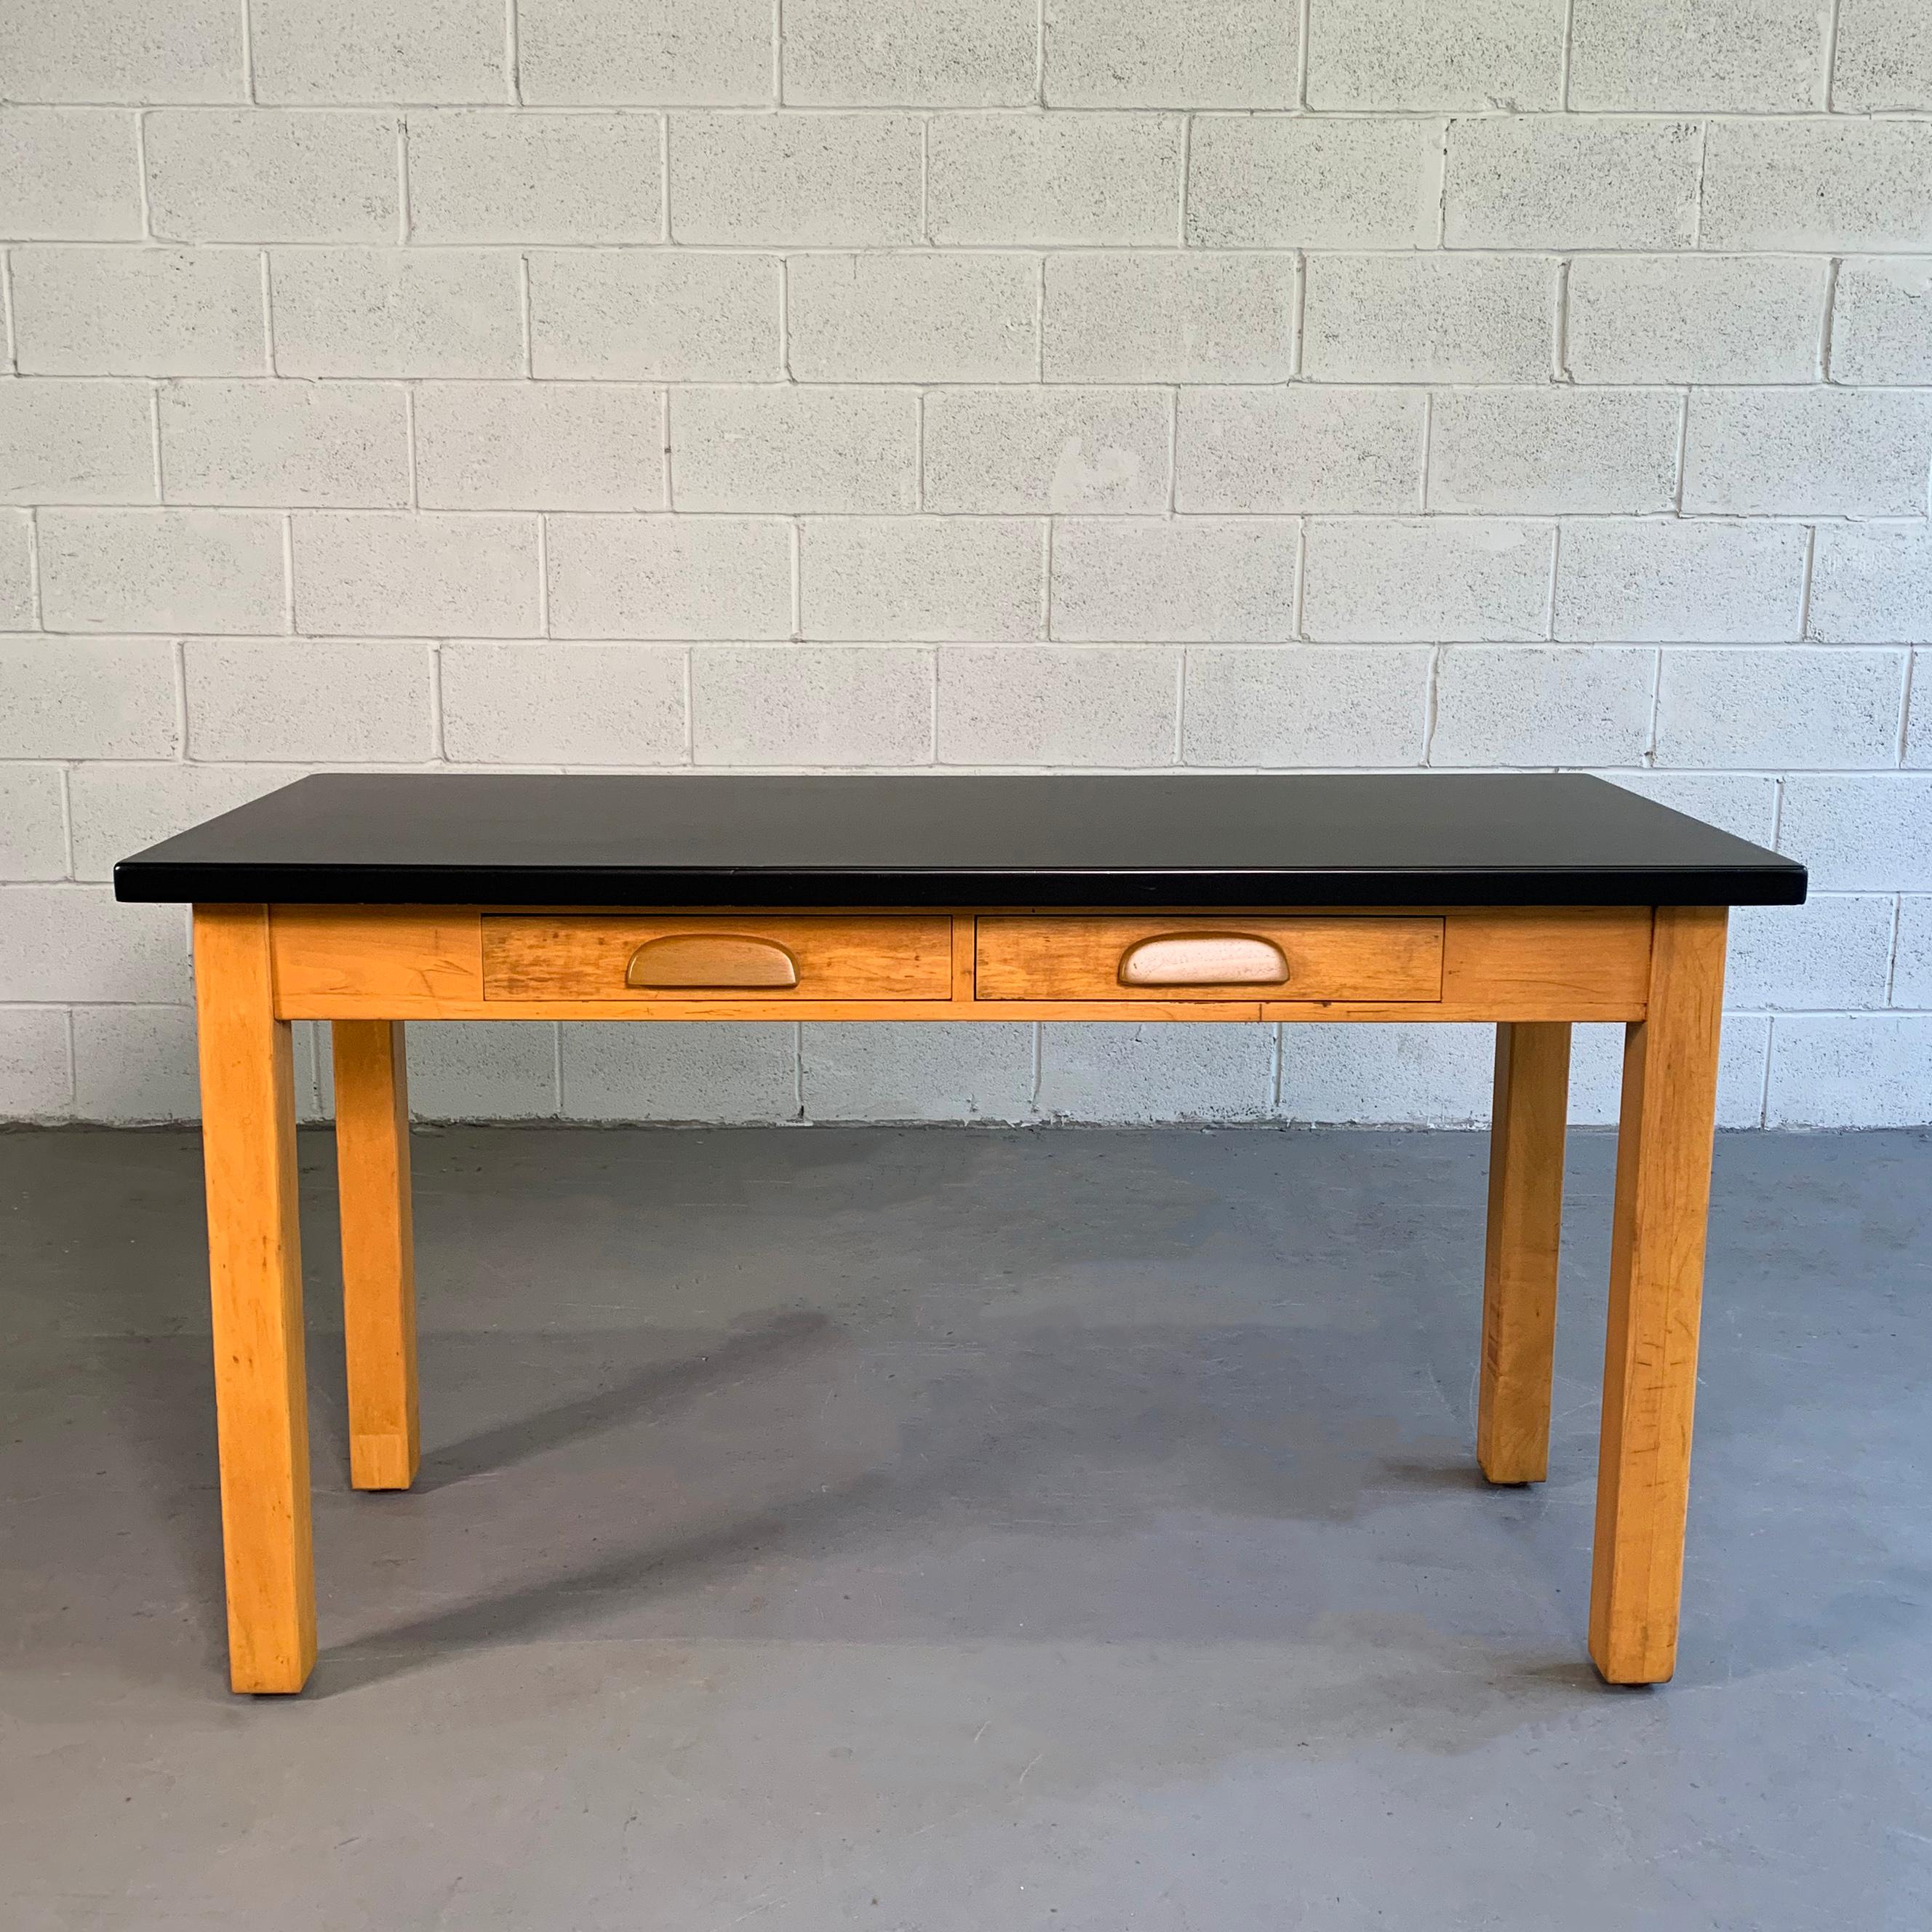 Midcentury, industrial, laboratory table features a 2 drawer, maple base with black, acid-resistant composite top for experiments. At 30.5 inches height, this work table makes a great desk, console, media table or slender dining table. The leg room